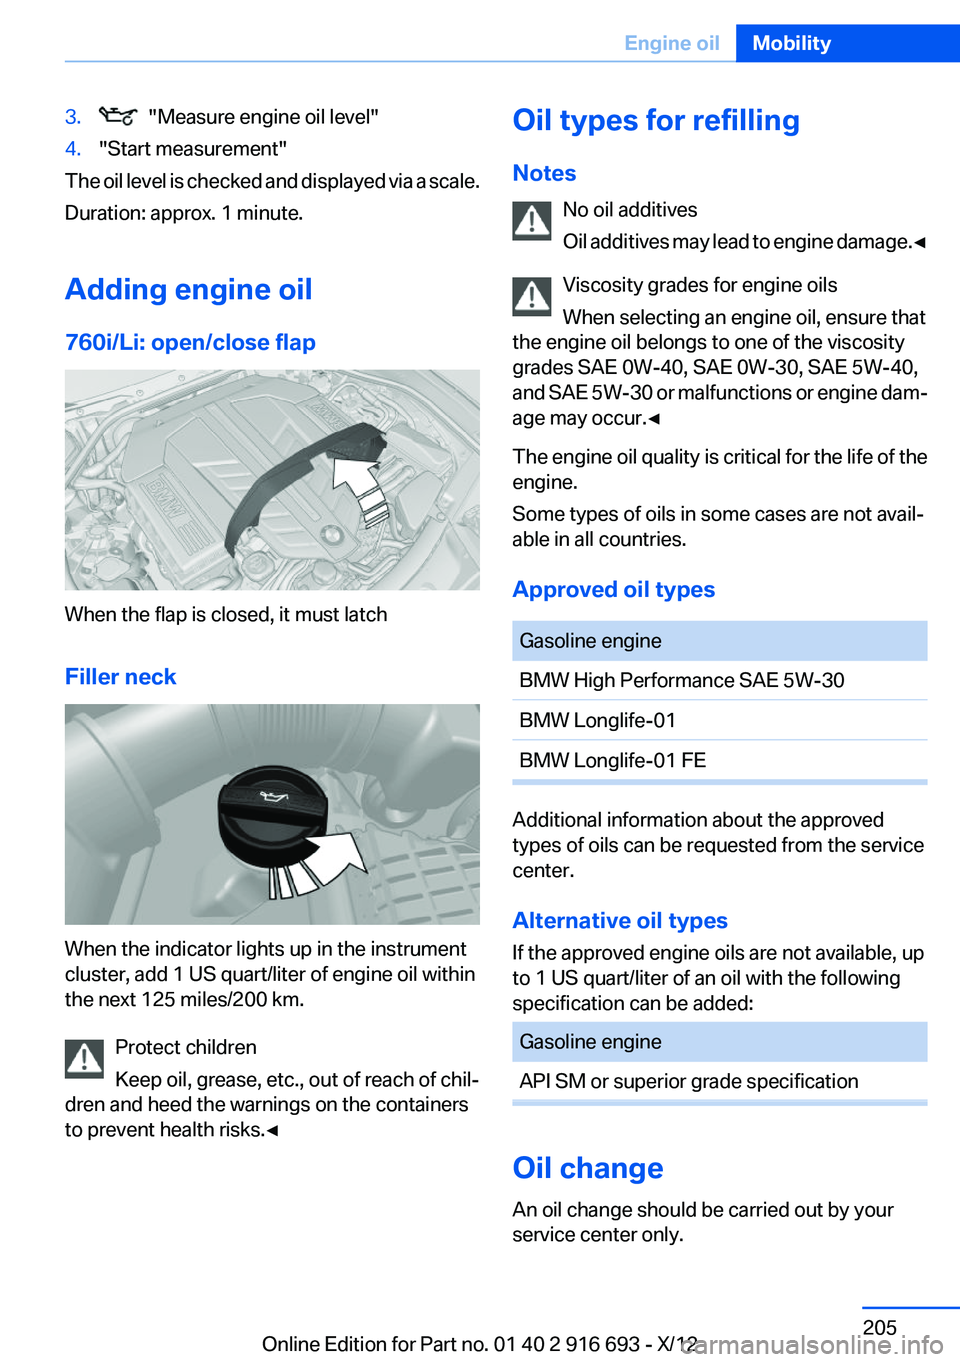 BMW 760LI 2013  Owners Manual 3.  "Measure engine oil level"4."Start measurement"
The oil level is checked and displayed via a scale.
Duration: approx. 1 minute.
Adding engine oil
760i/Li: open/close flap
When the 